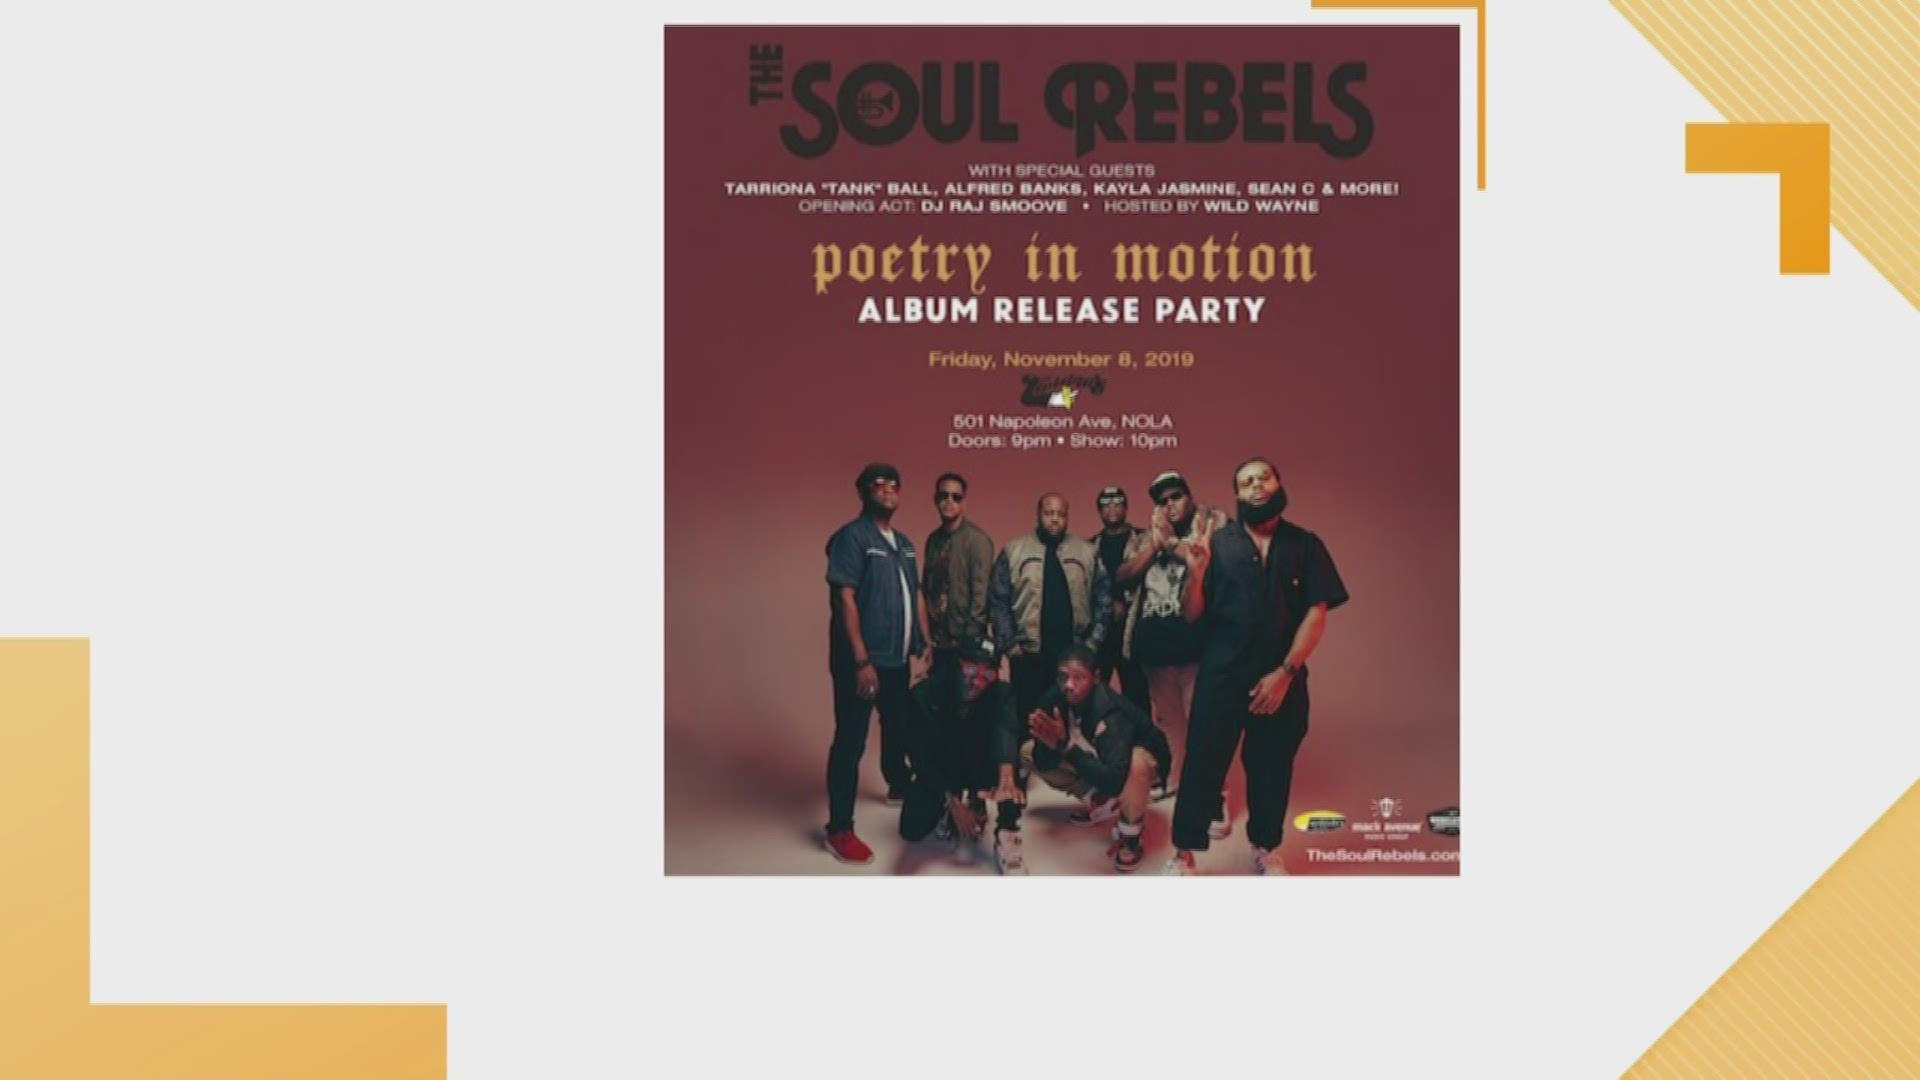 The Soul Rebels sits down with Eric to talk about  what to expect on their new album "Poetry In Motion".